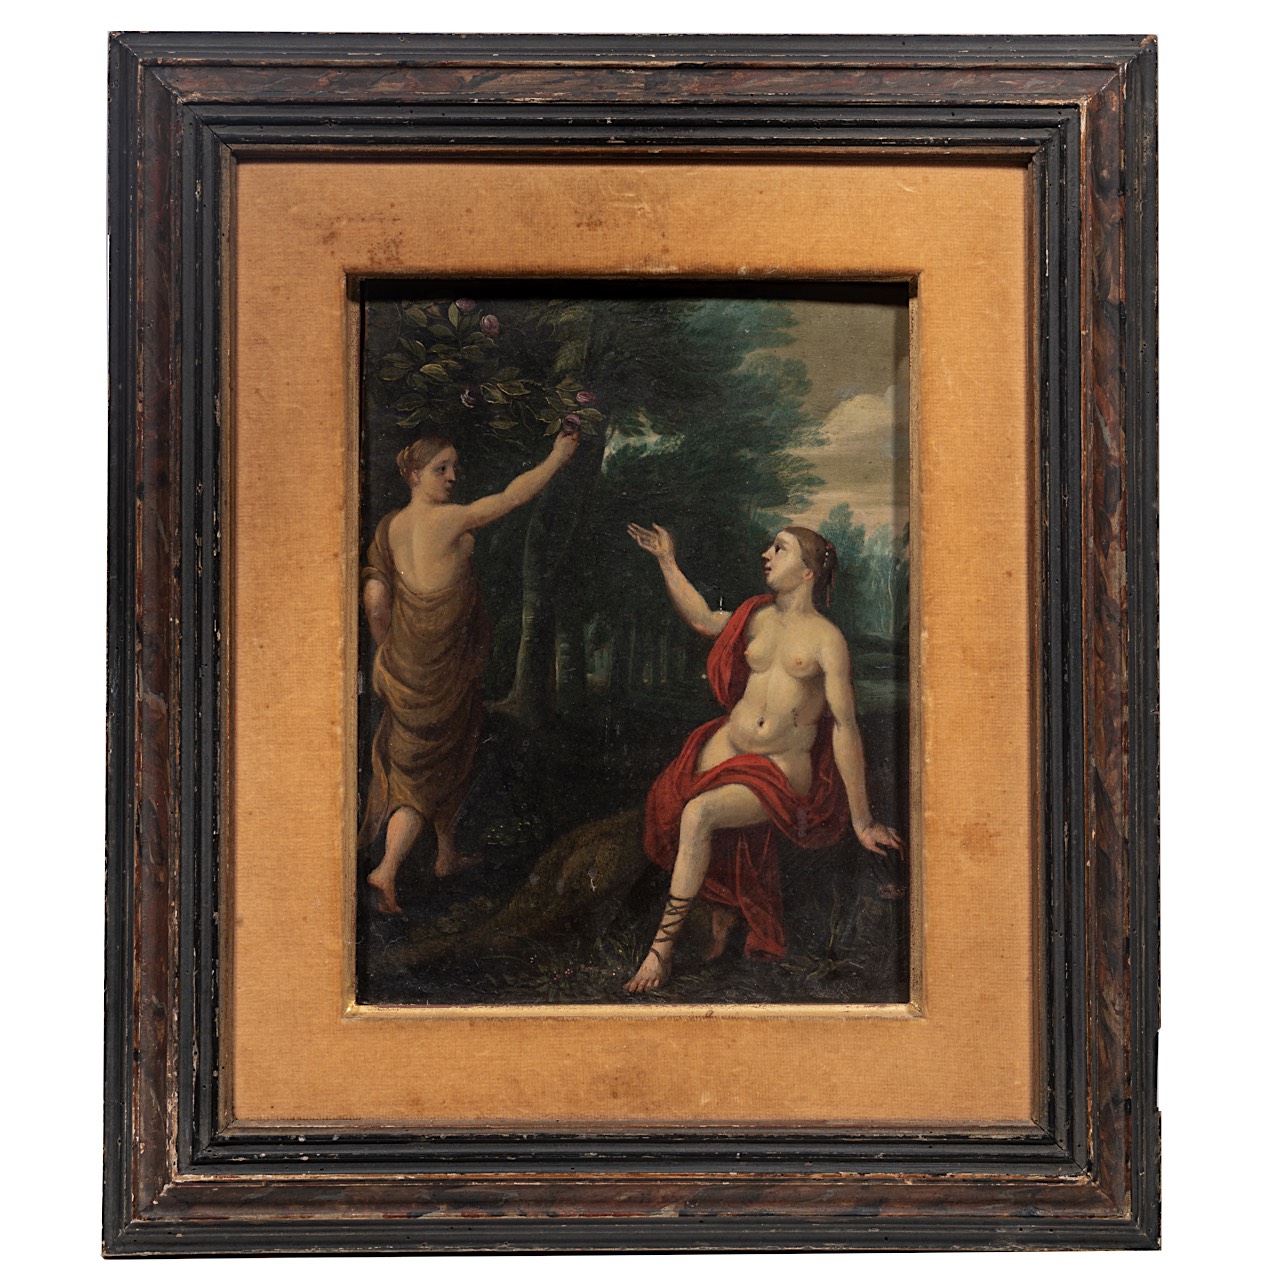 Two female Antique figures in a wooded landscape, Antwerp School, 17thC, oil on copper 21 x 16 cm. ( - Image 2 of 5